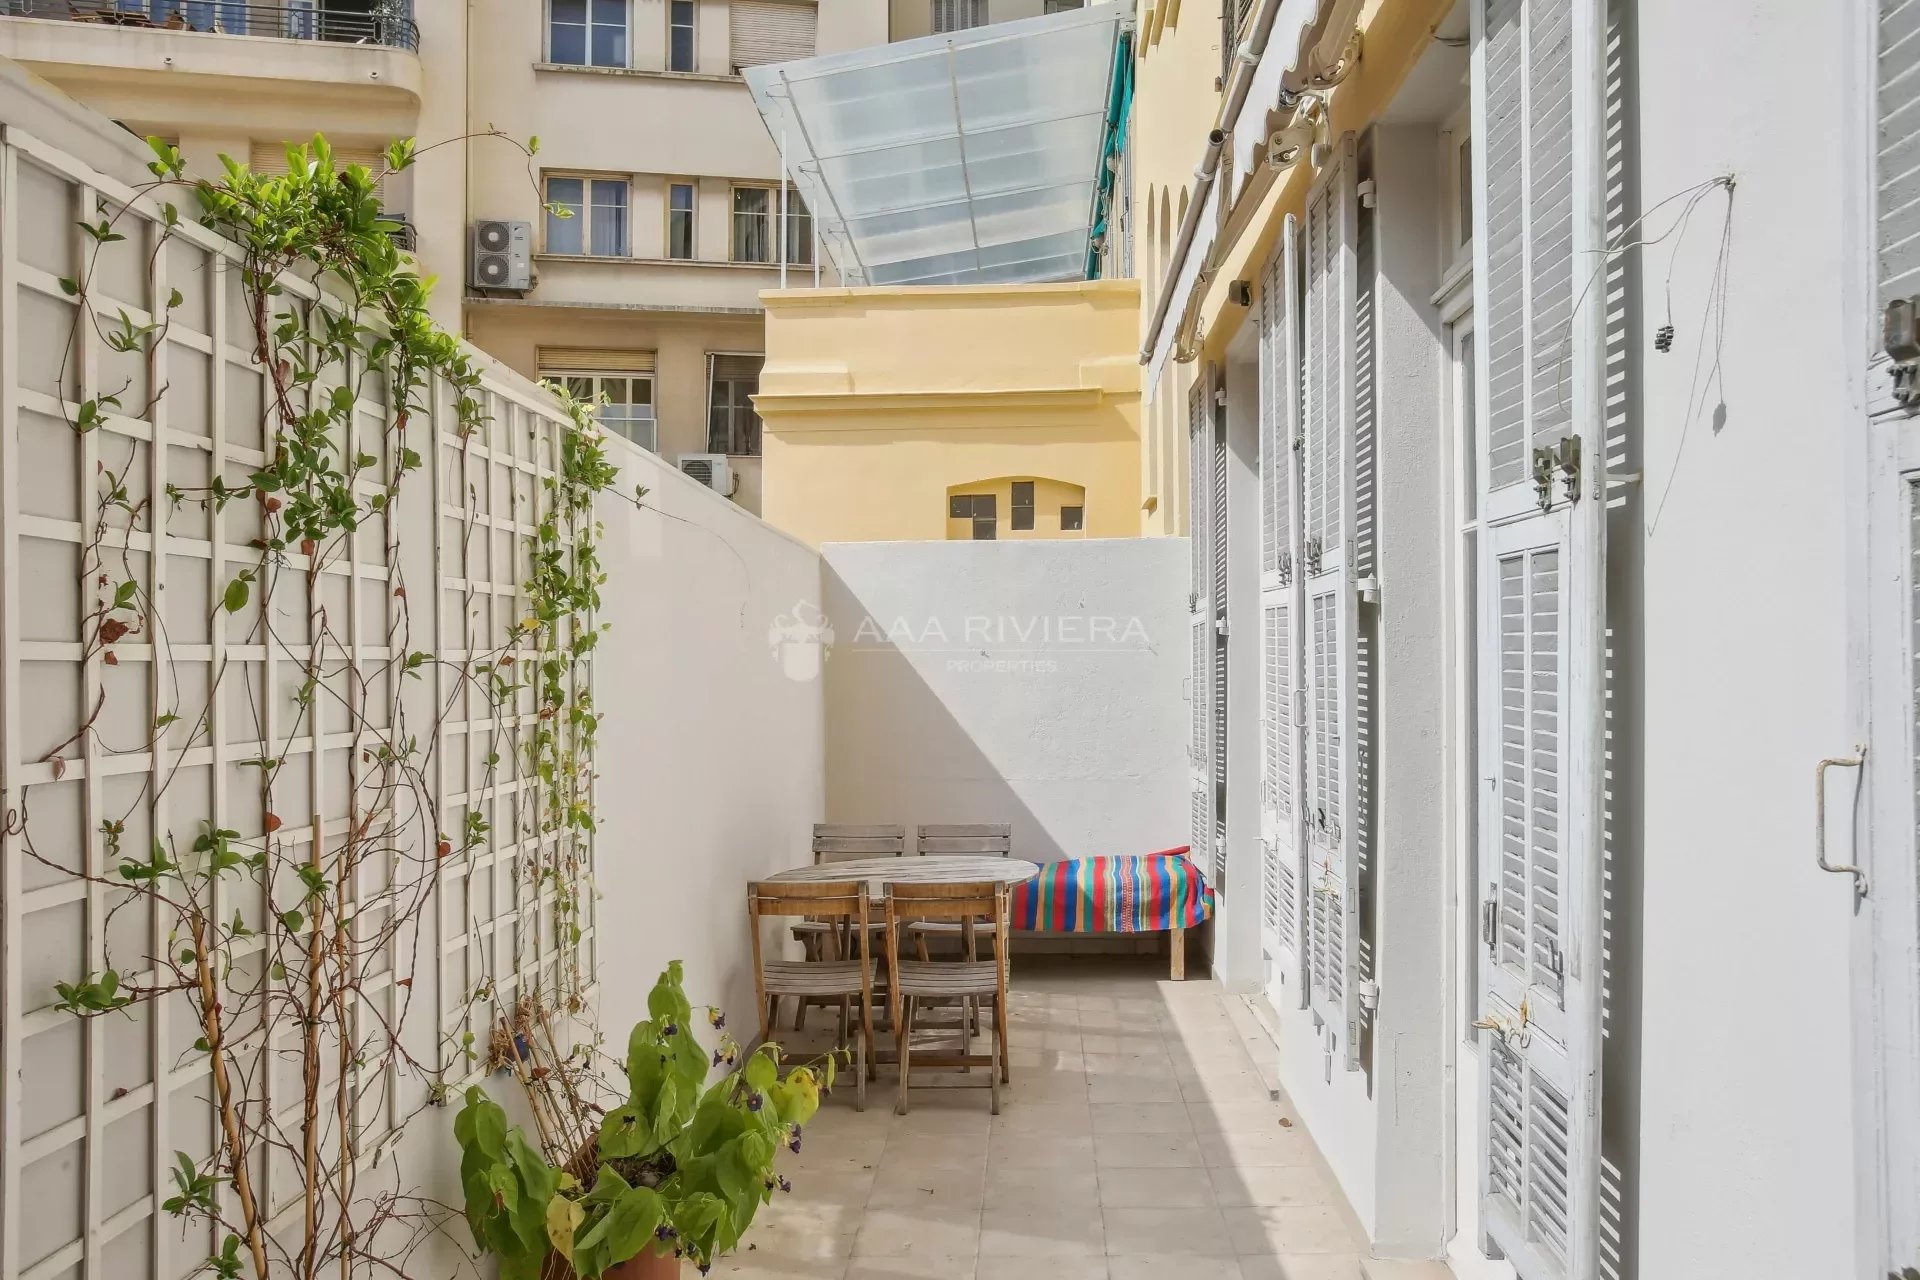 EXCLUSIVITE - NICE CARRE D'OR - GRAND APPARTEMENT 4 p BOURGEOIS  - TERRASSE